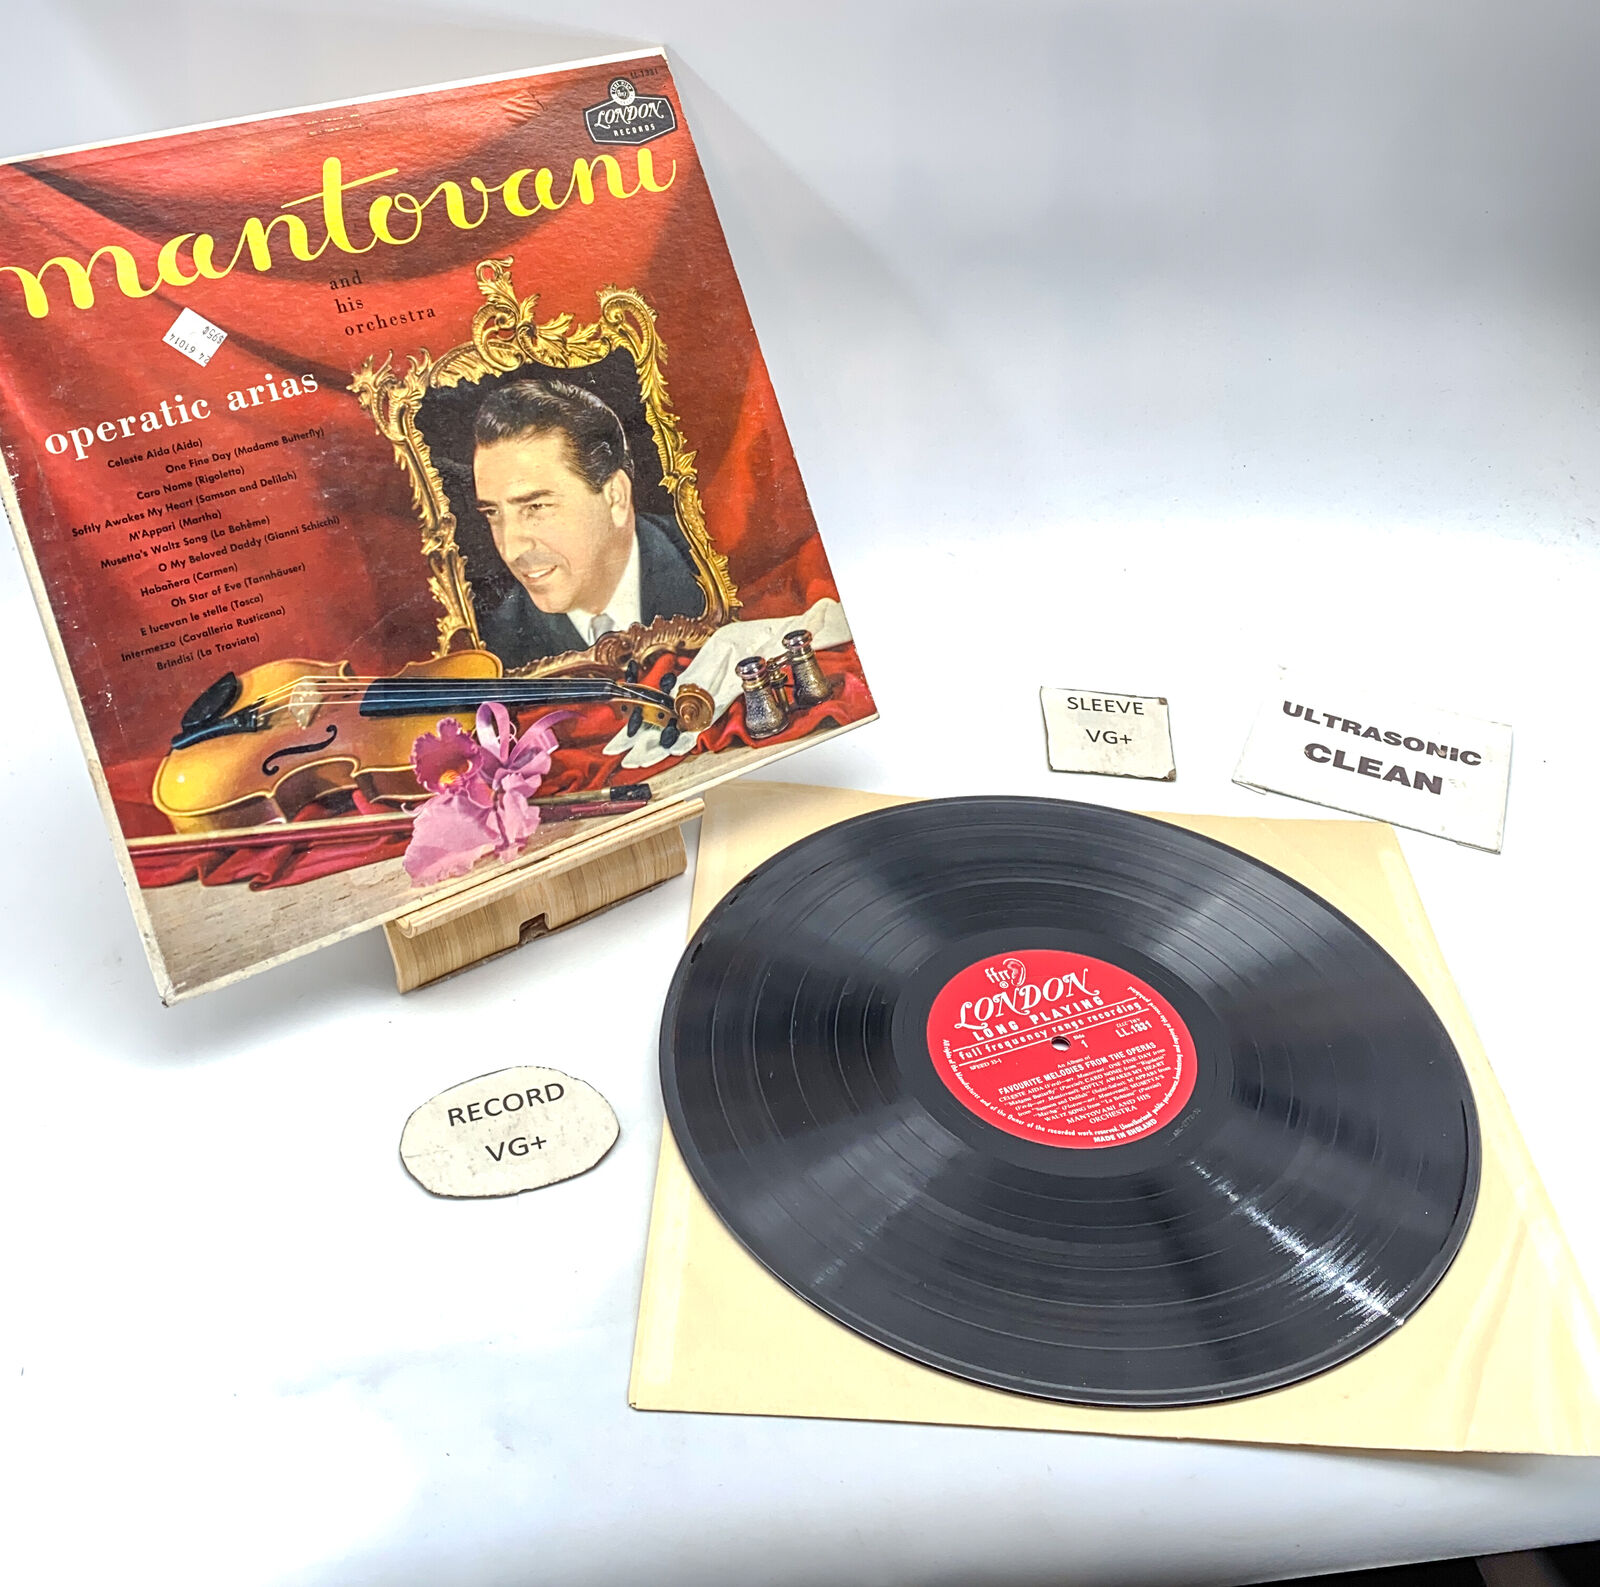 Mantovani And His Orchestra Operatic Arias -  VG+/VG+  LL-1331 Ultrasonic Clean